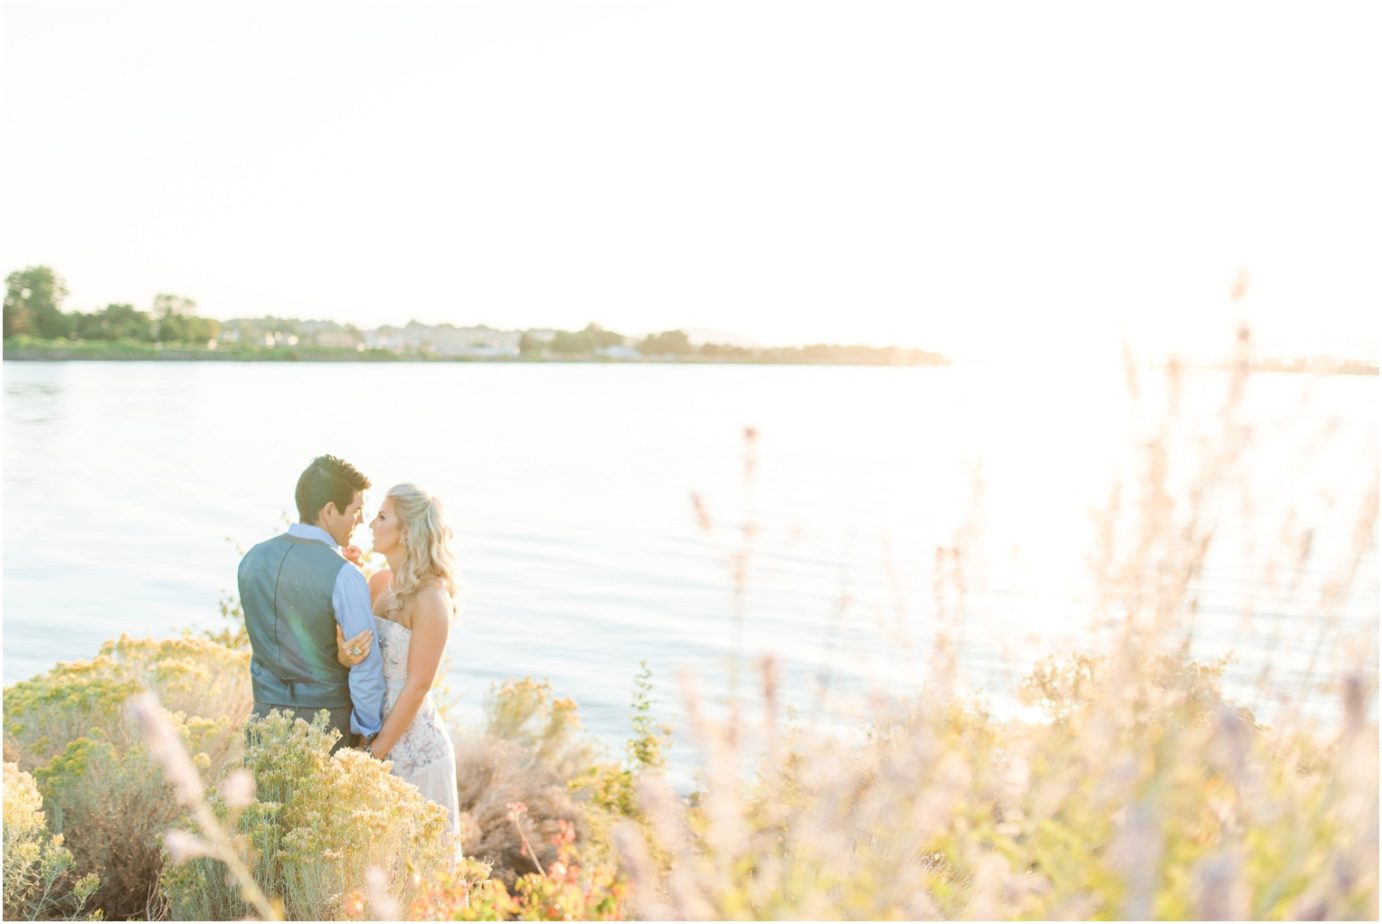 Clover Island Anniversary Session Kennewick WA Couple in the grass by the lighthouse